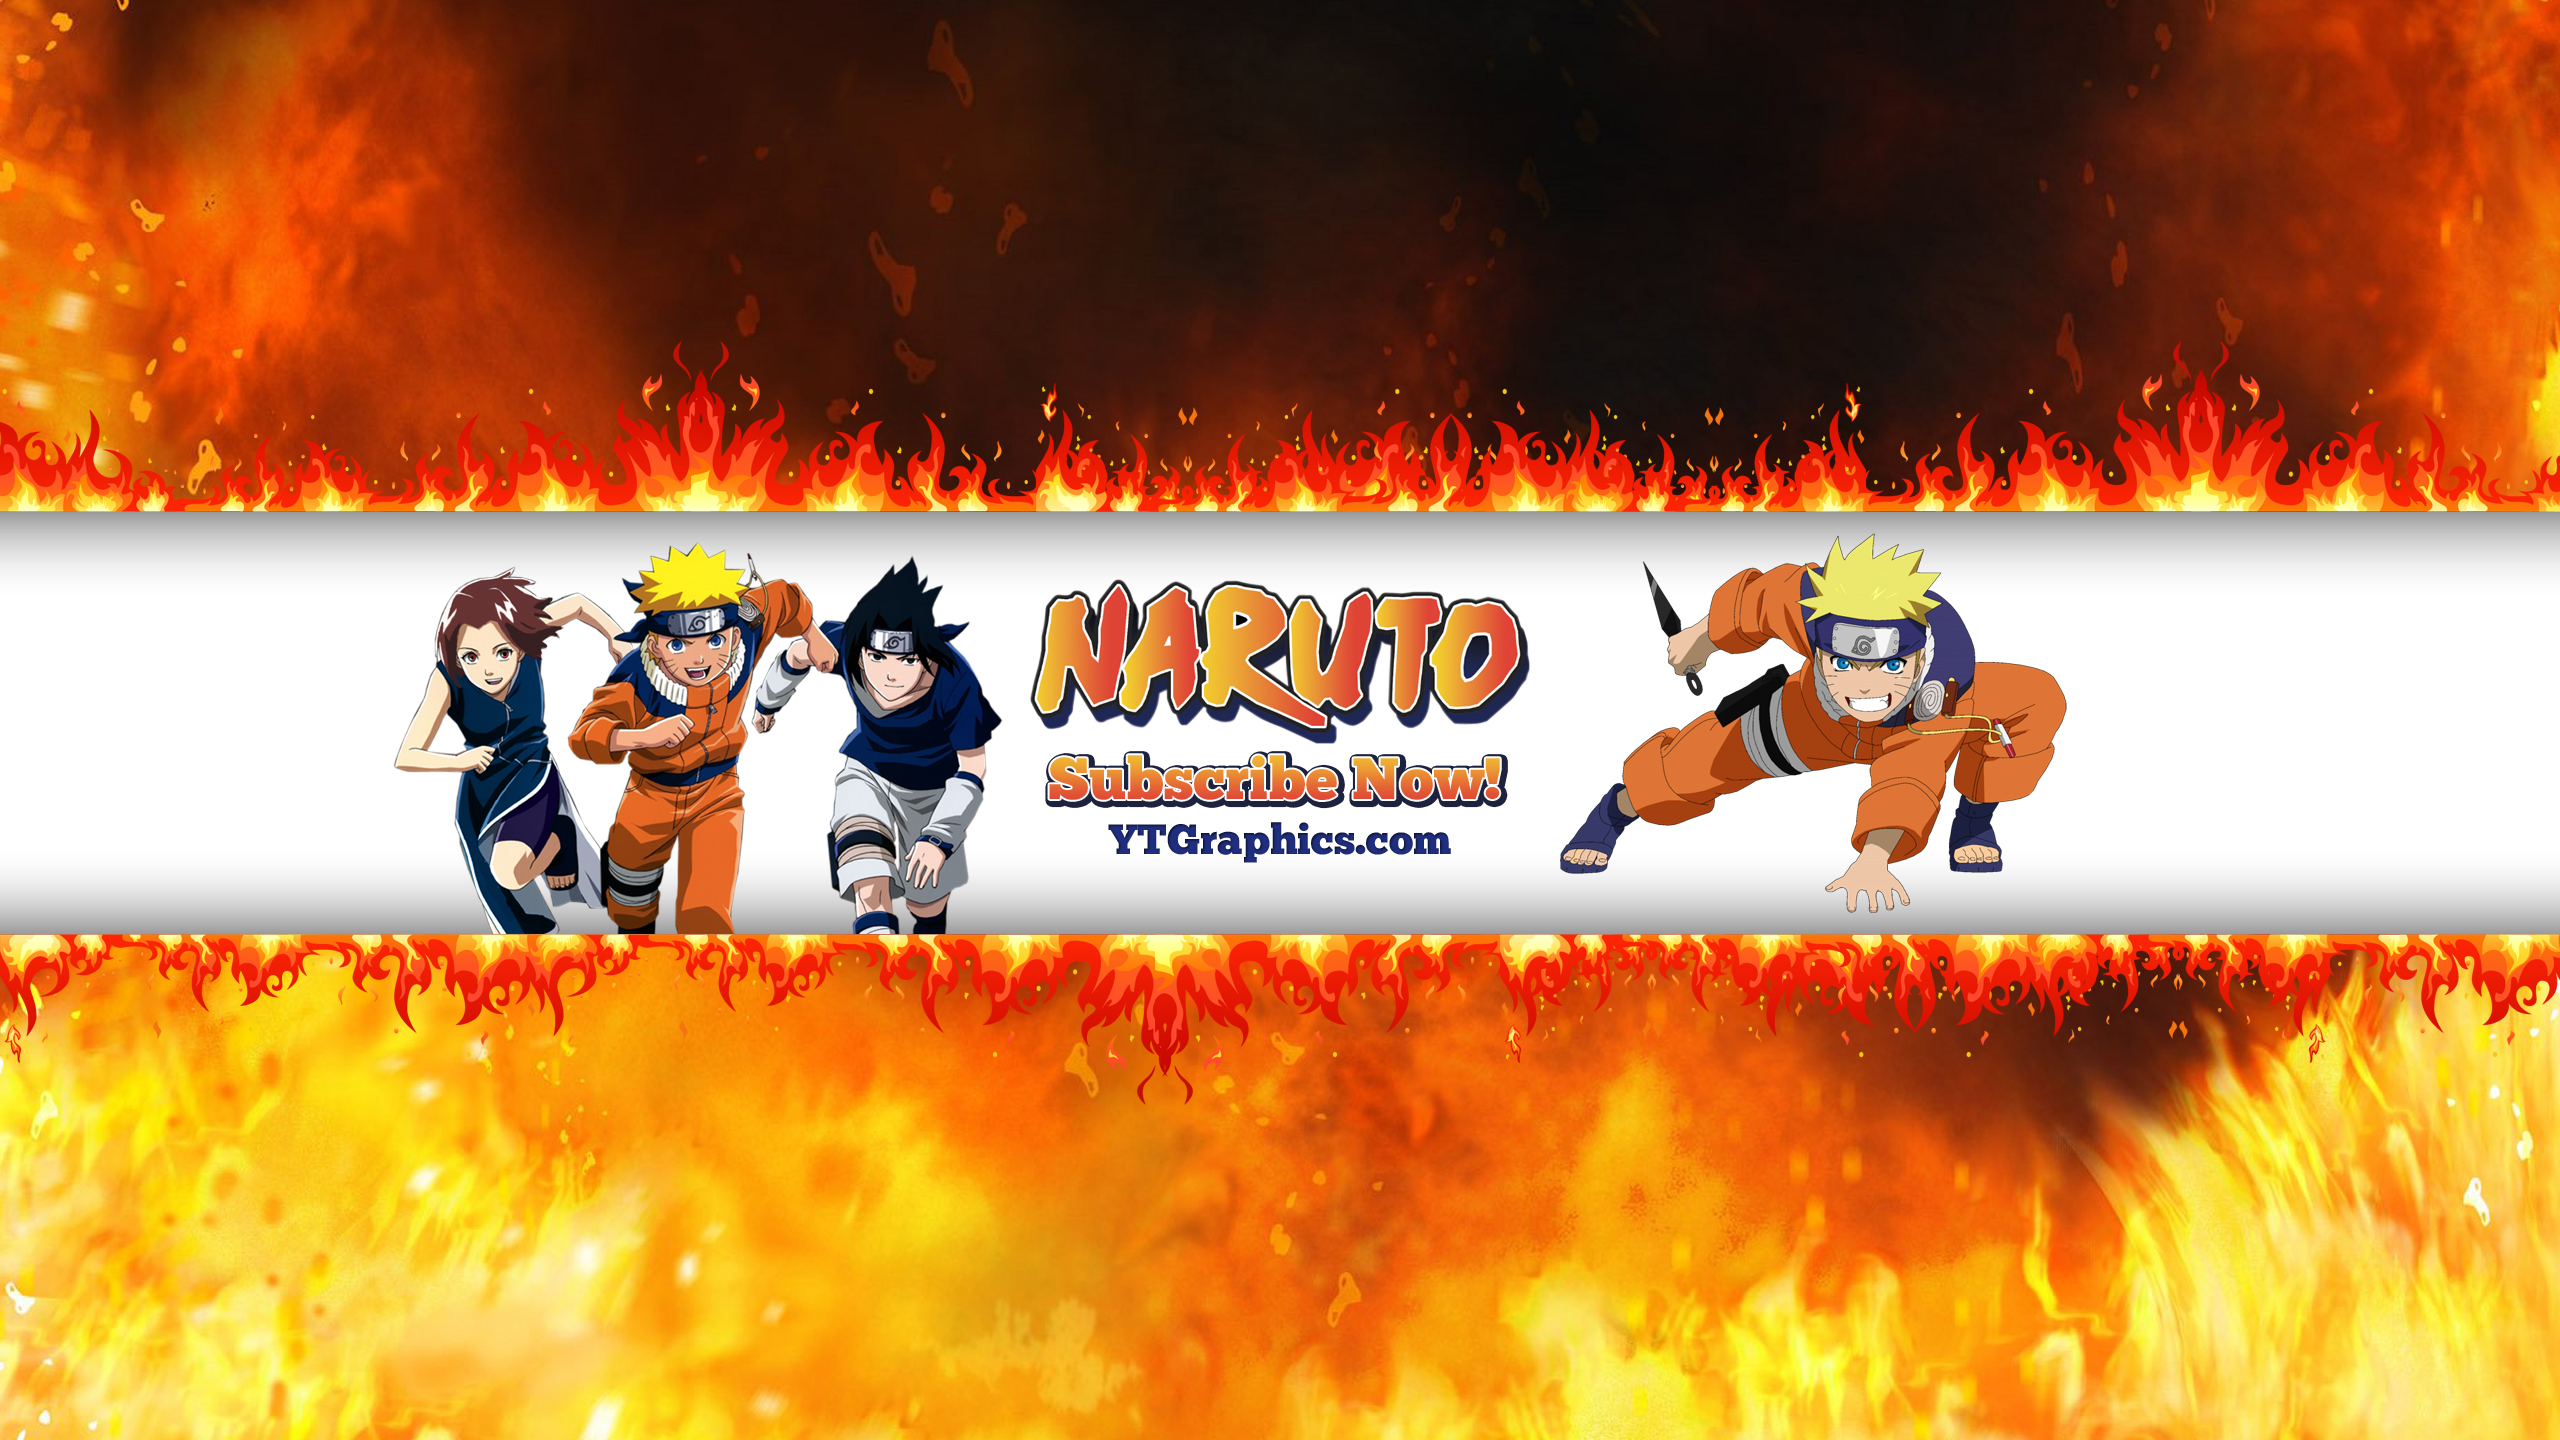 Naruto Youtube Channel Art Banner